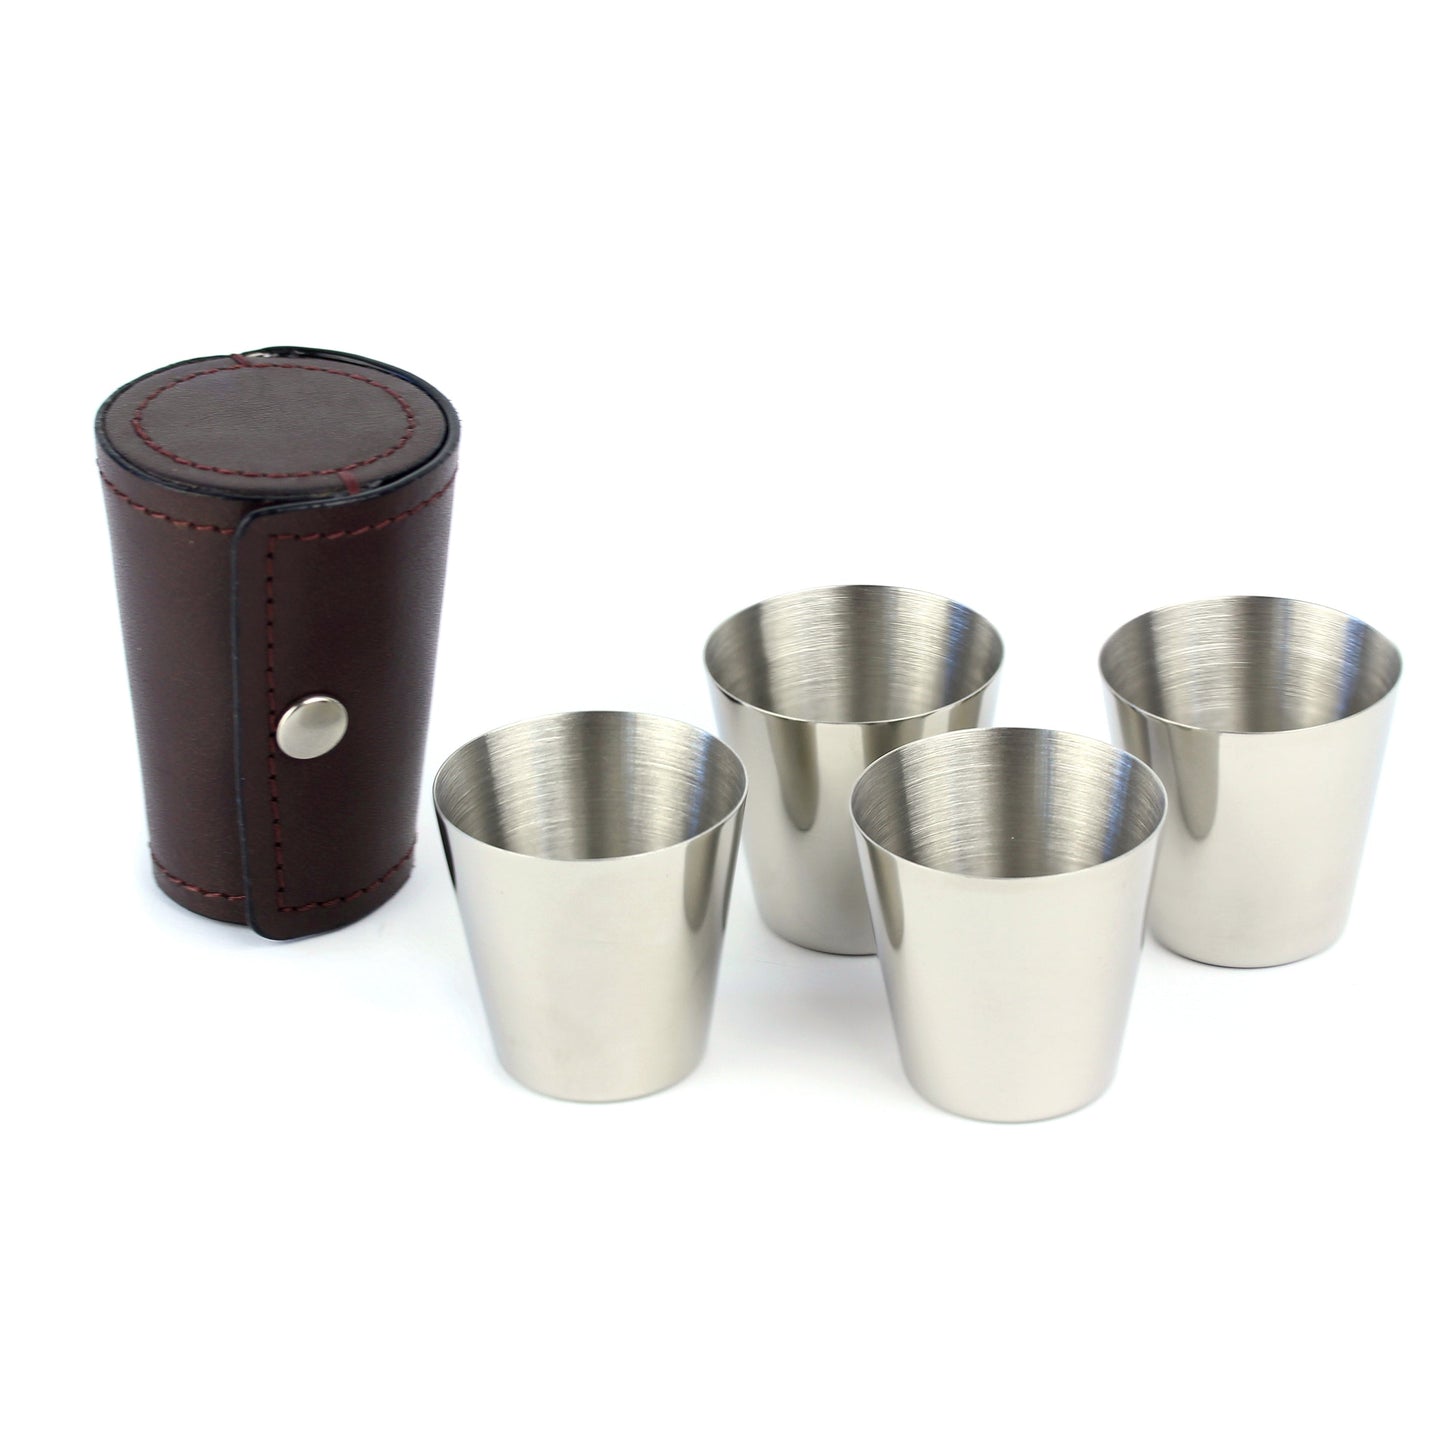 4 x Stainless Steel Nip Cups with Brown Leather Pouch